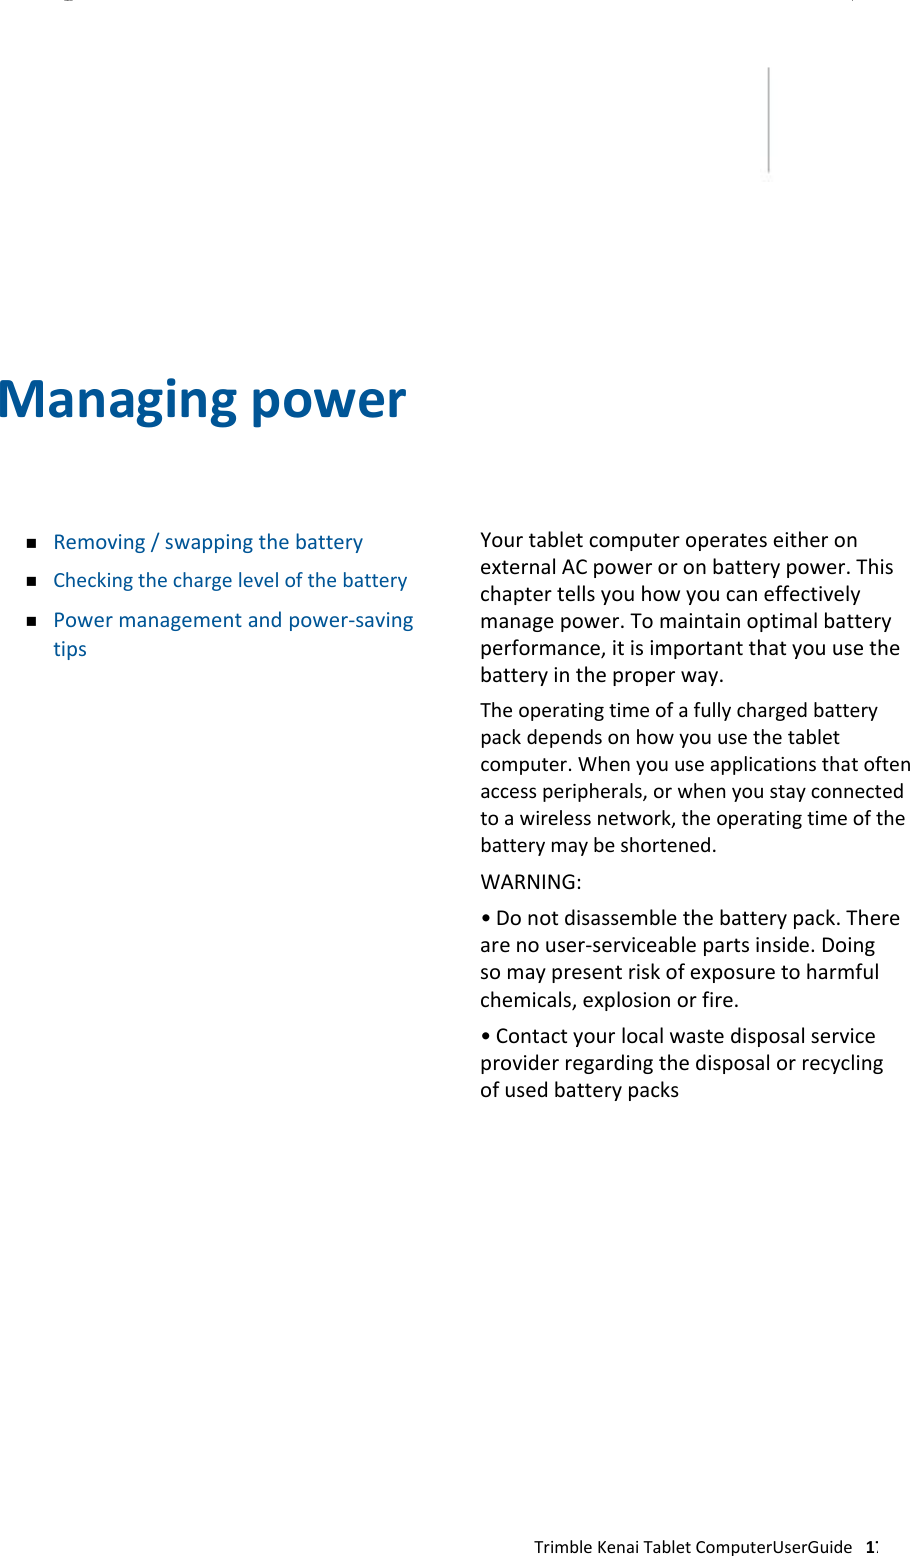 CHAPTER 3                  Managingpower     Removing/swappingthebatteryCheckingthechargelevelofthebatteryPowermanagementandpower‐savingtips    YourtabletcomputeroperateseitheronexternalACpoweroronbatterypower.Thischaptertellsyouhowyoucaneffectivelymanagepower.Tomaintainoptimalbatteryperformance,itisimportantthatyouusethebatteryintheproperway.  Theoperatingtimeofafullychargedbatterypackdependsonhowyouusethetabletcomputer.Whenyouuseapplicationsthatoftenaccessperipherals,orwhenyoustayconnectedtoawirelessnetwork,theoperatingtimeofthebatterymaybeshortened.  WARNING:  •Donotdisassemblethebatterypack.Therearenouser‐serviceablepartsinside.Doingsomaypresentriskofexposuretoharmfulchemicals,explosionorfire.•Contactyourlocalwastedisposalserviceproviderregardingthedisposalorrecyclingofusedbatterypacks                    TrimbleKenaiTabletComputerUserGuide17 